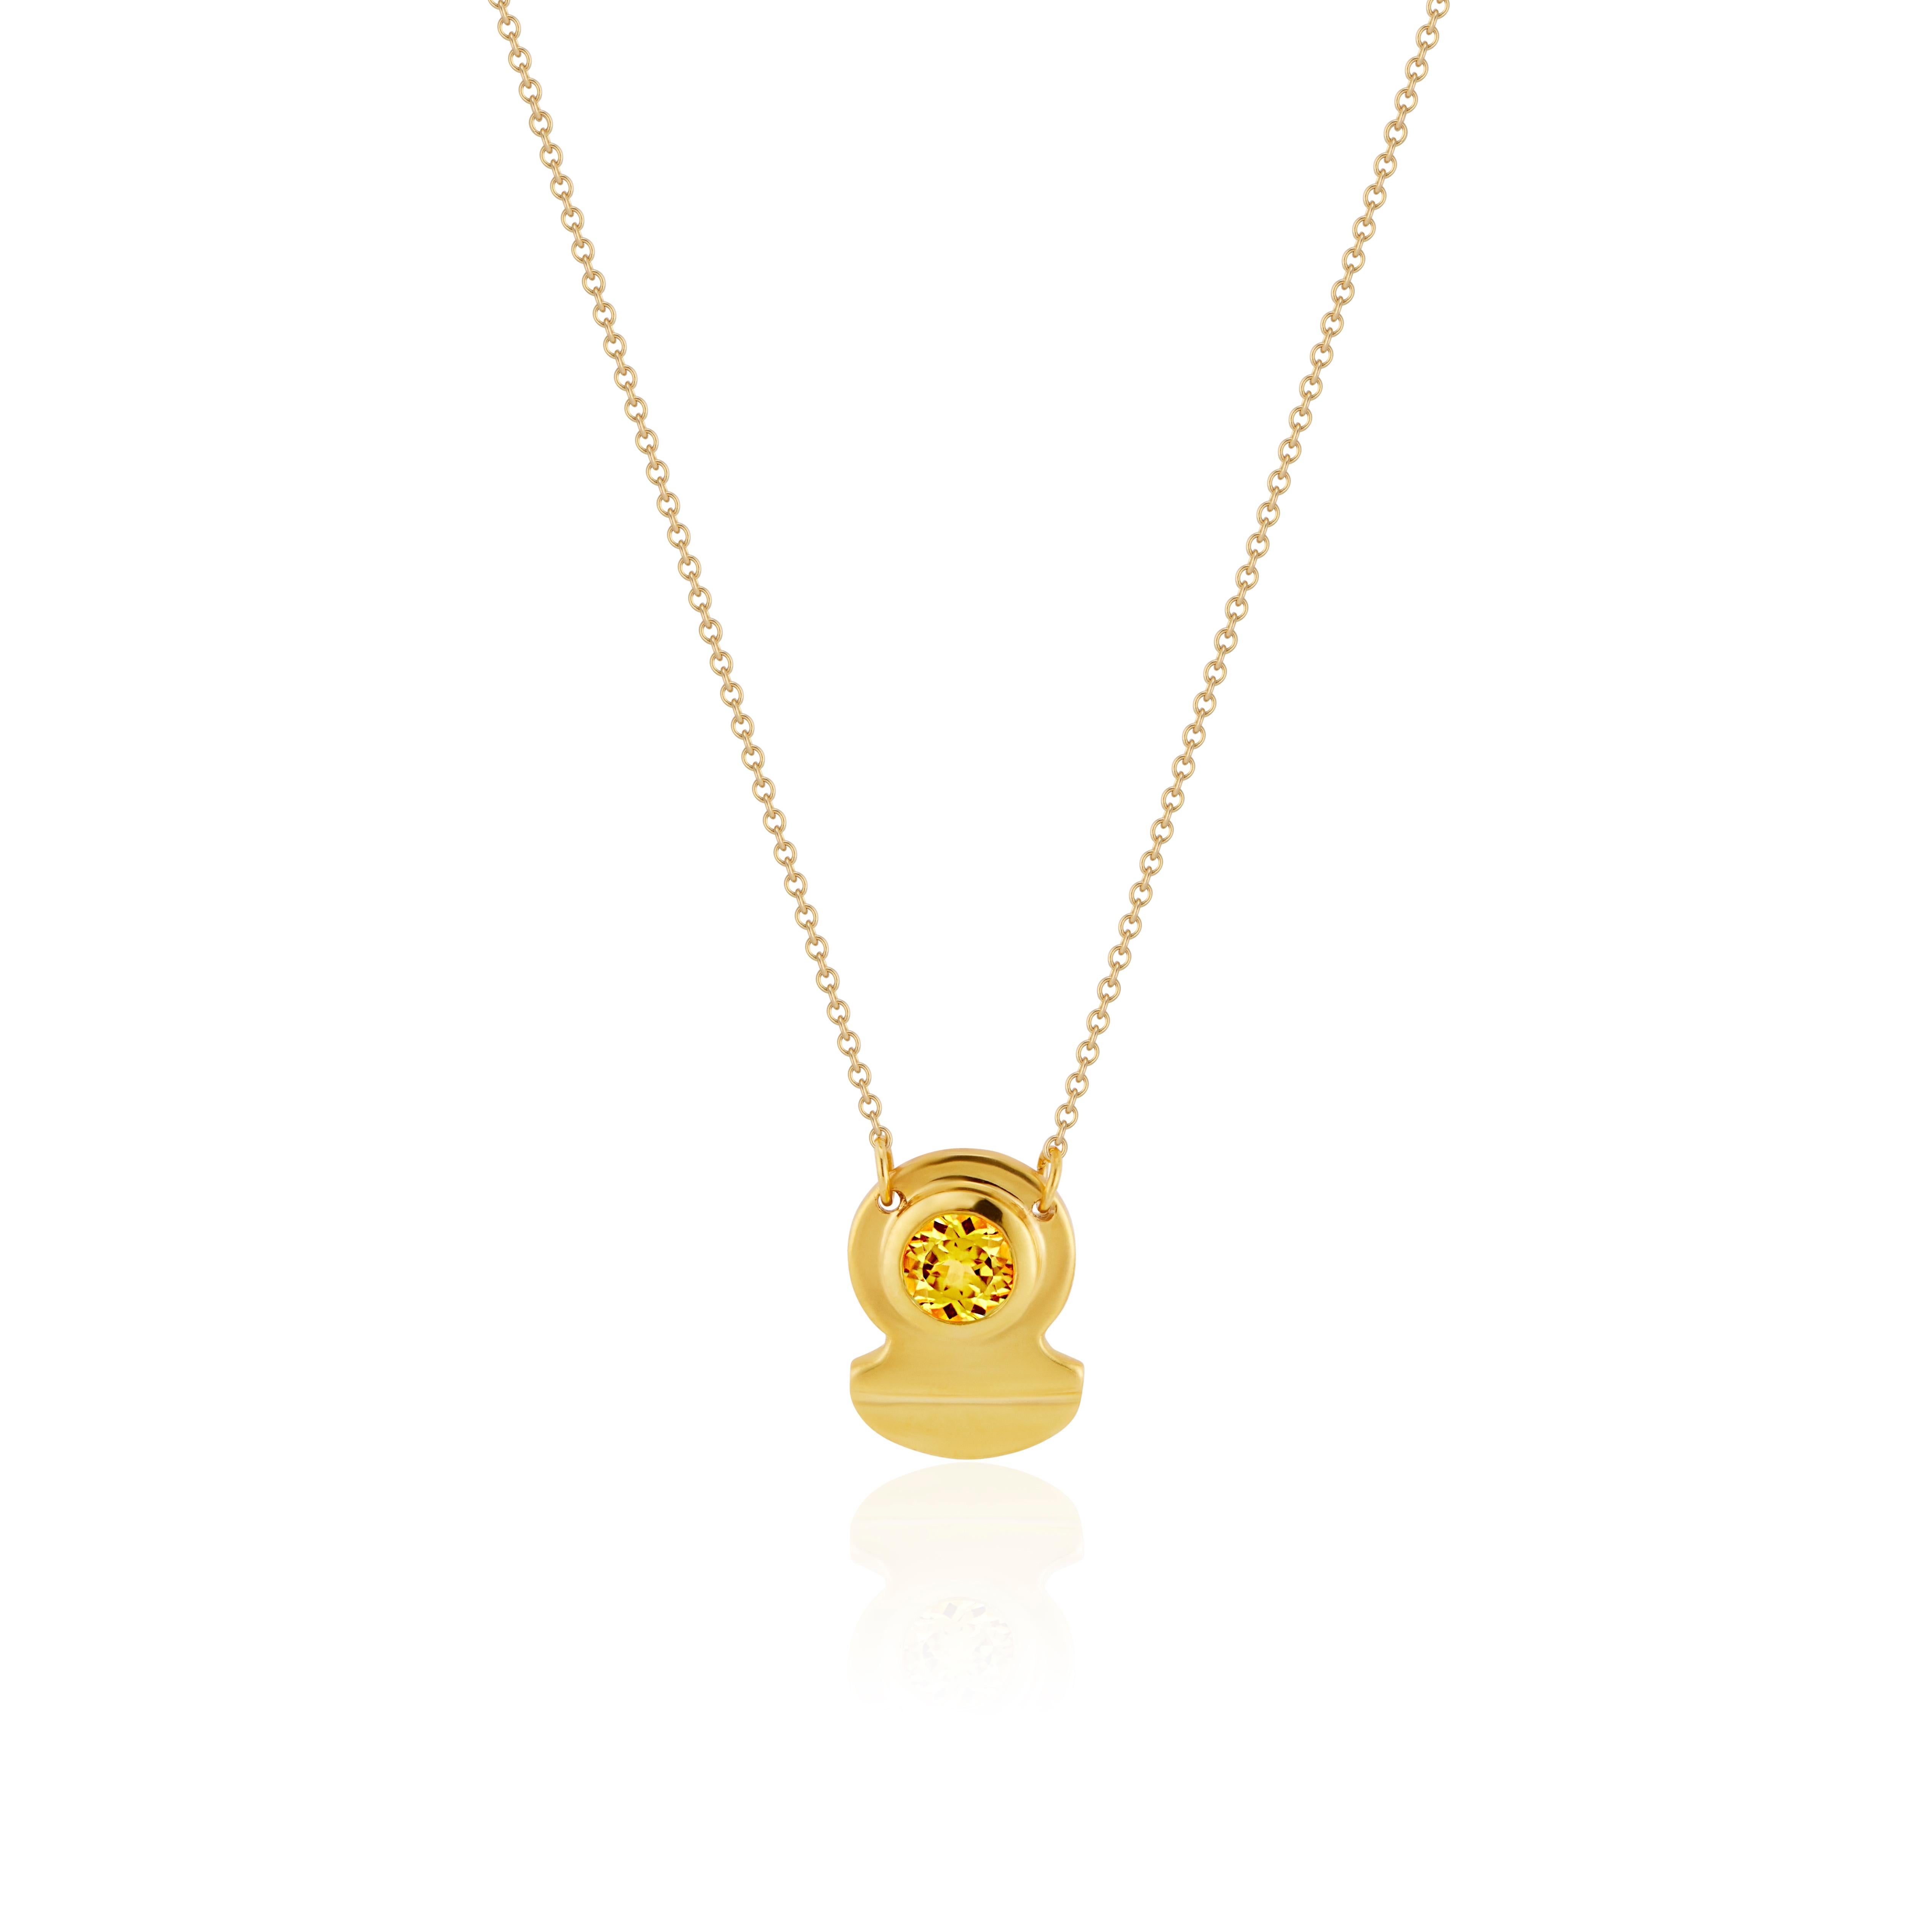 This 16-inch necklace is 22 Karat Yellow Gold Vermeil with an Citrine Solitaire Stone.

We also offer this in 15.5 inches upon request.  Please message the storefront for this option.

All items are made to order, please allow 10-15 business days